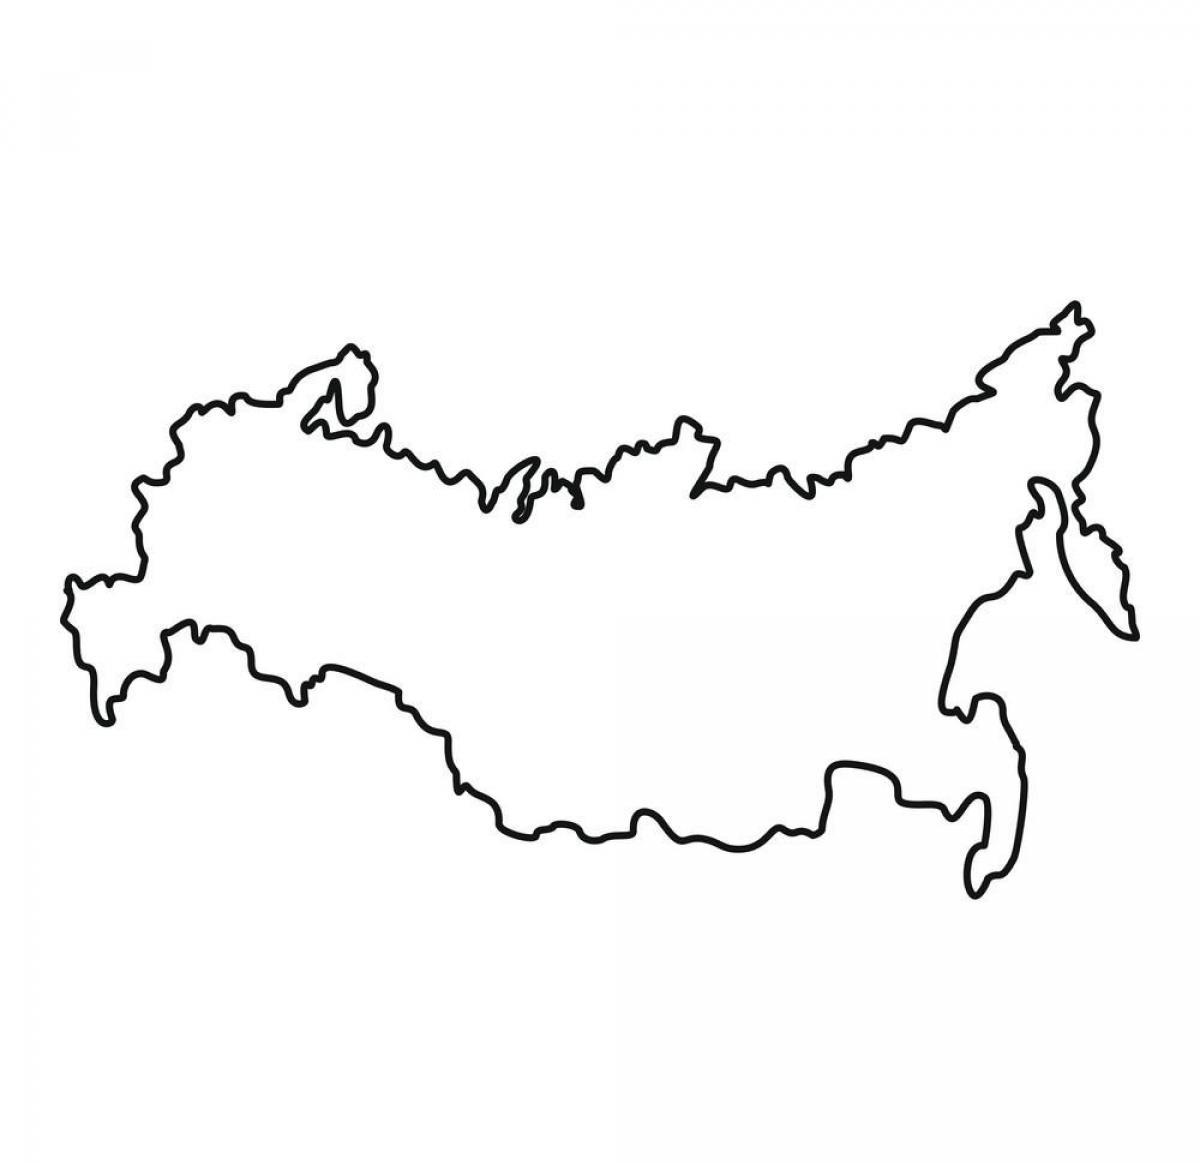 Russia contours map